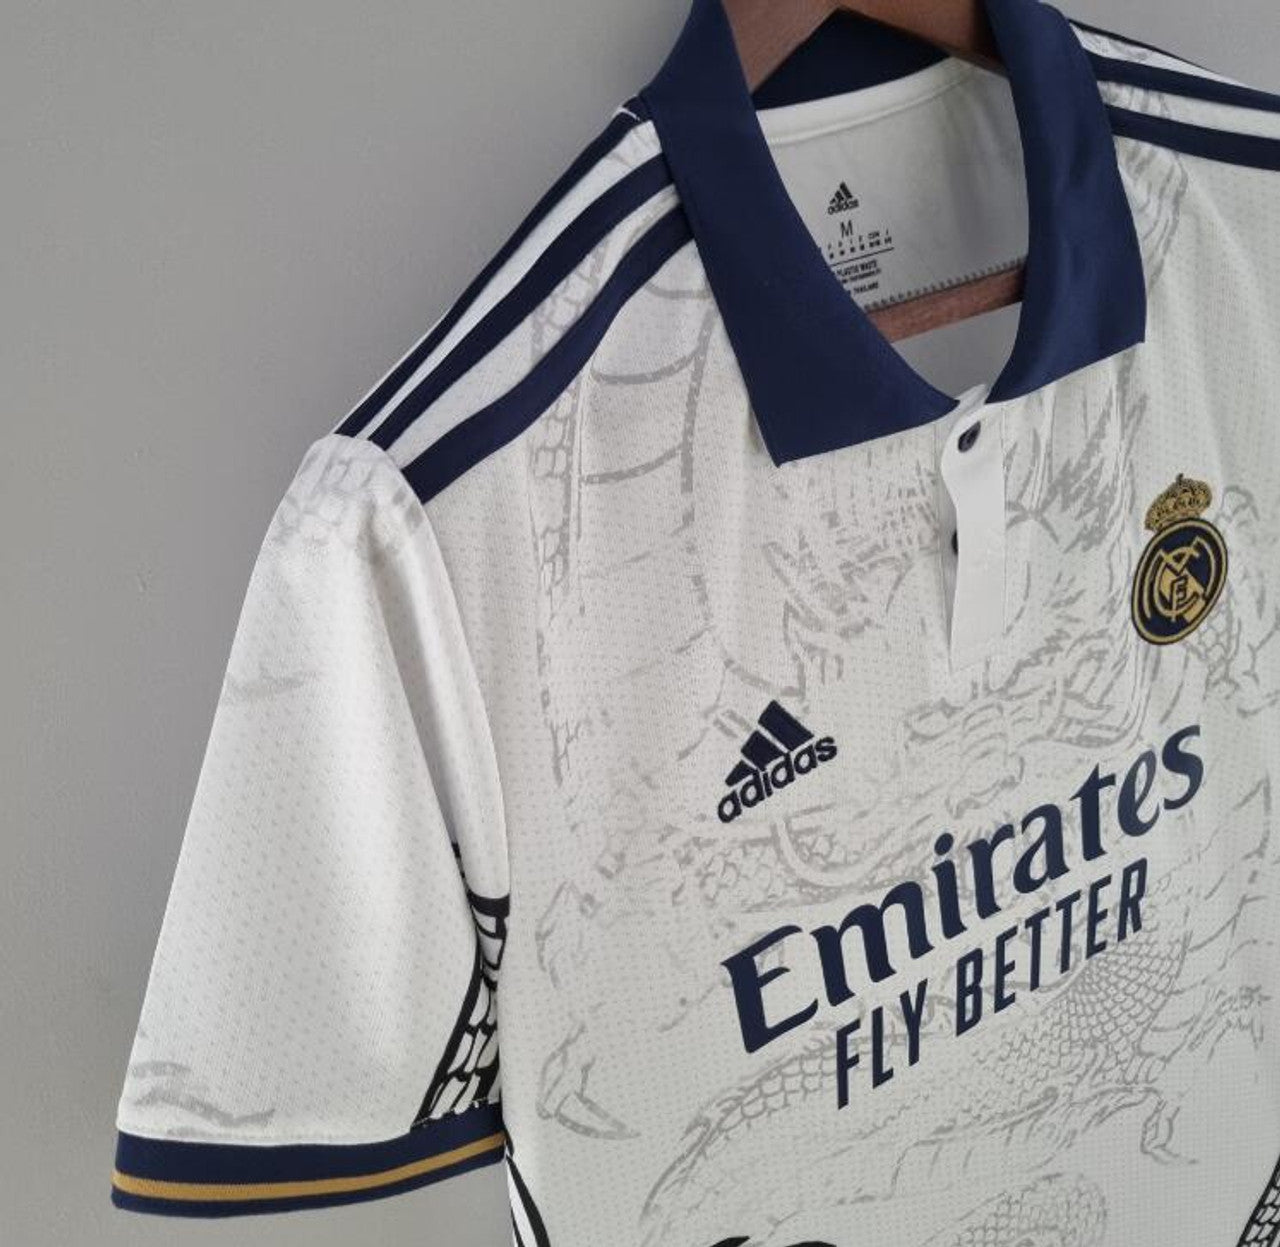 Real Madrid Chinese Dragons Special Kit